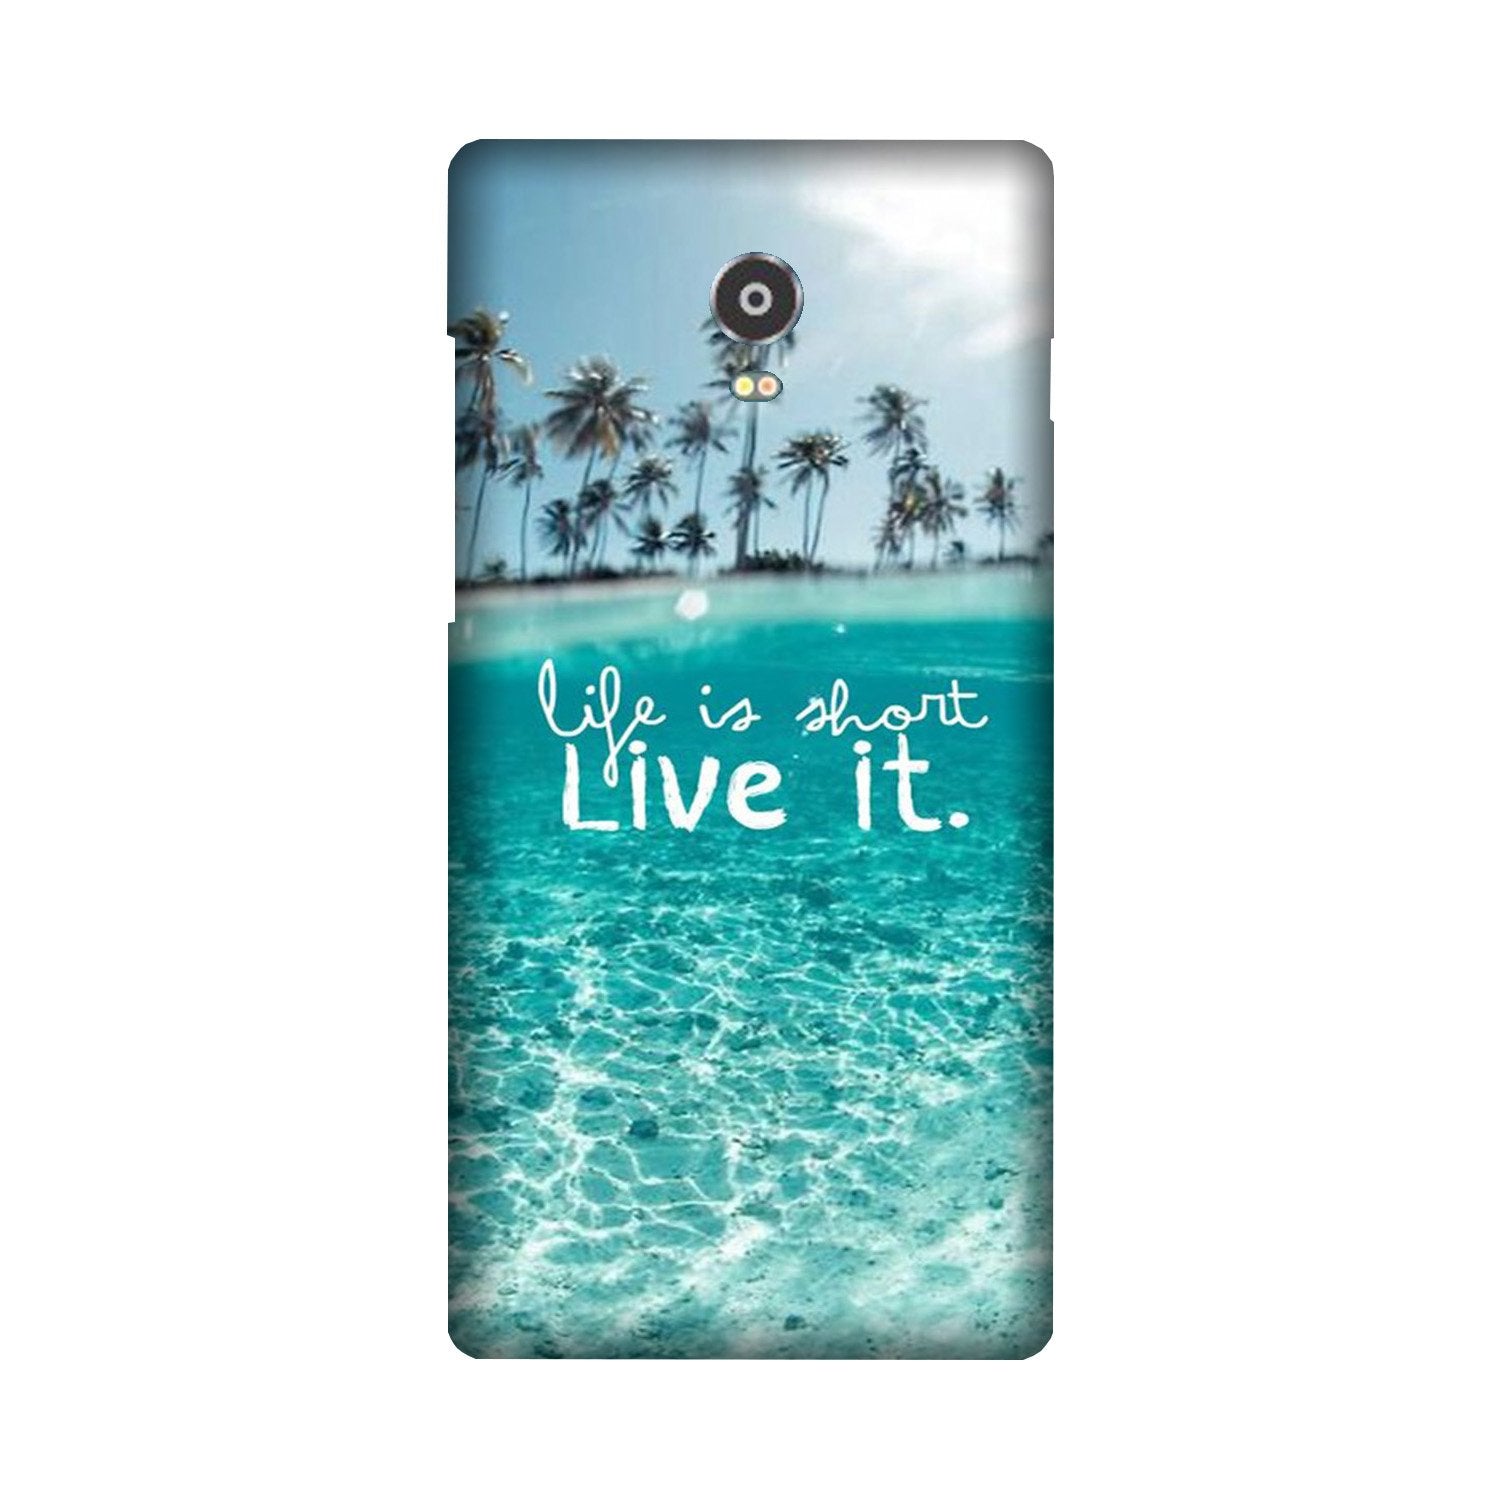 Life is short live it Case for Lenovo Vibe P1